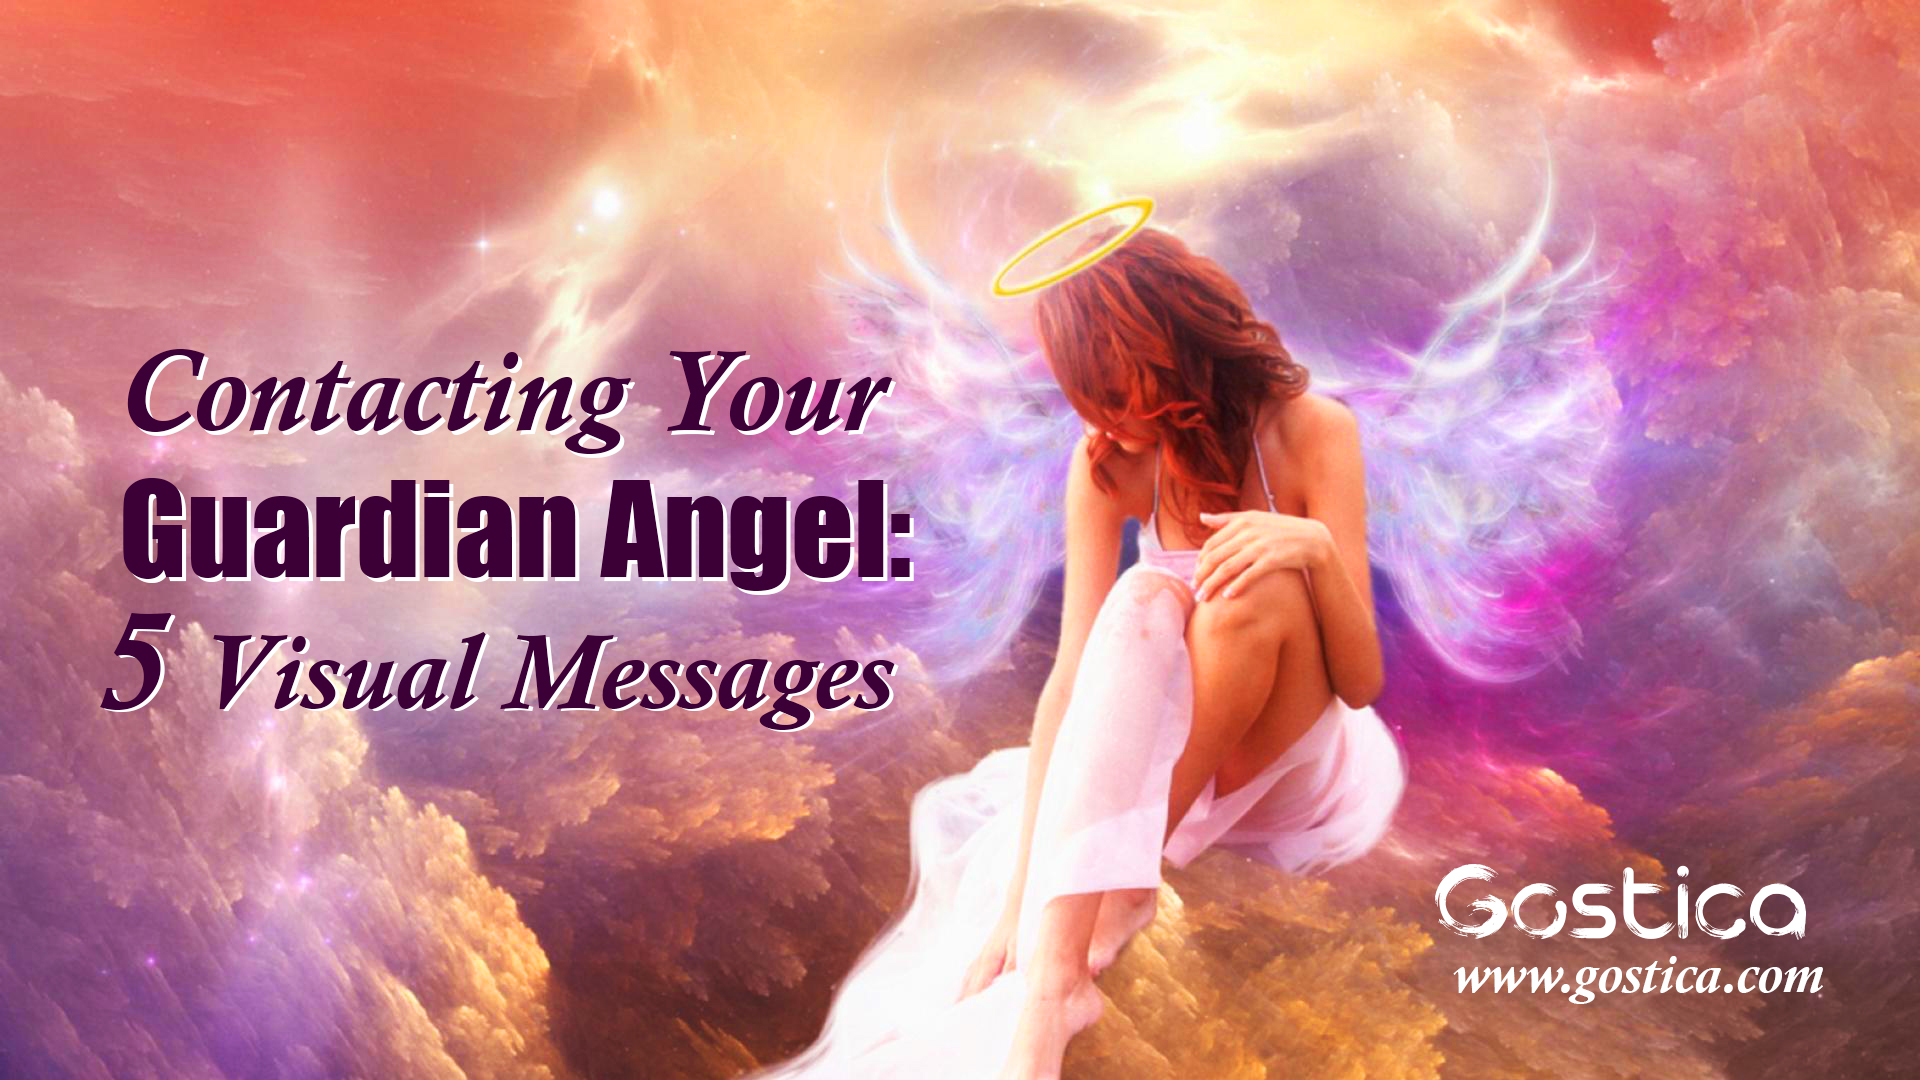 Contacting-Your-Guardian-Angel-5-Visual-Messages.jpg